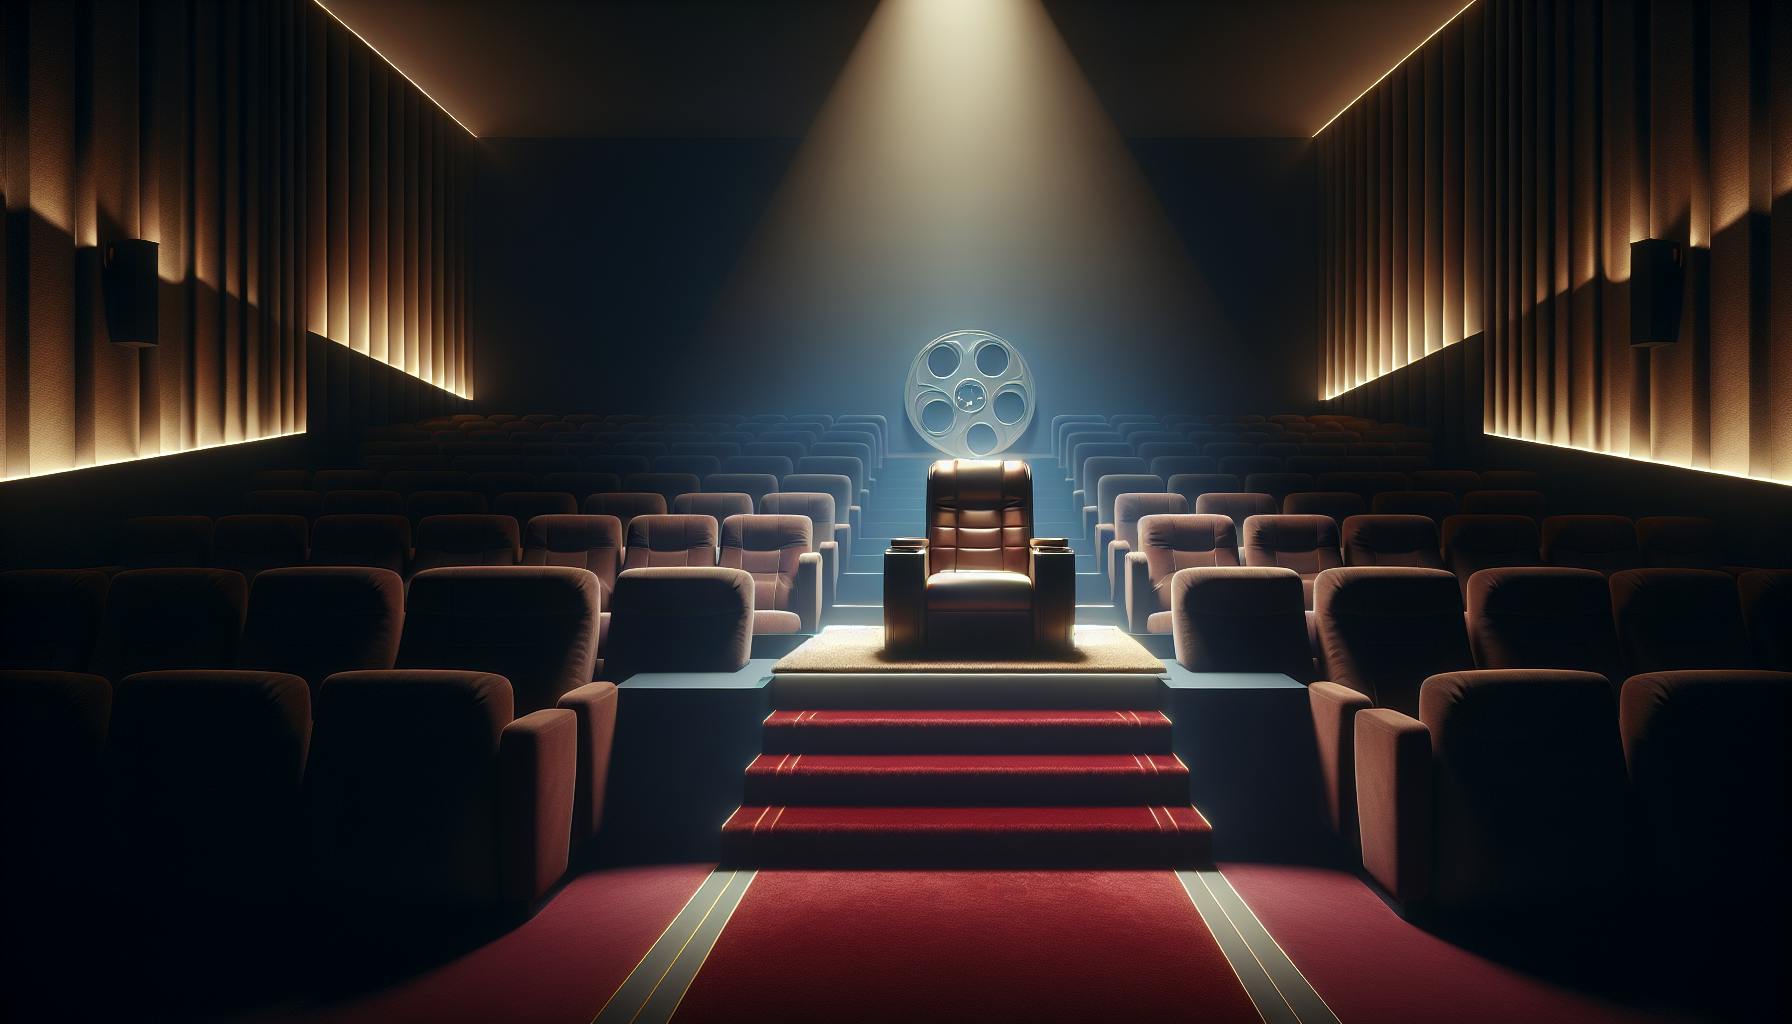 Cinema seating suppliers